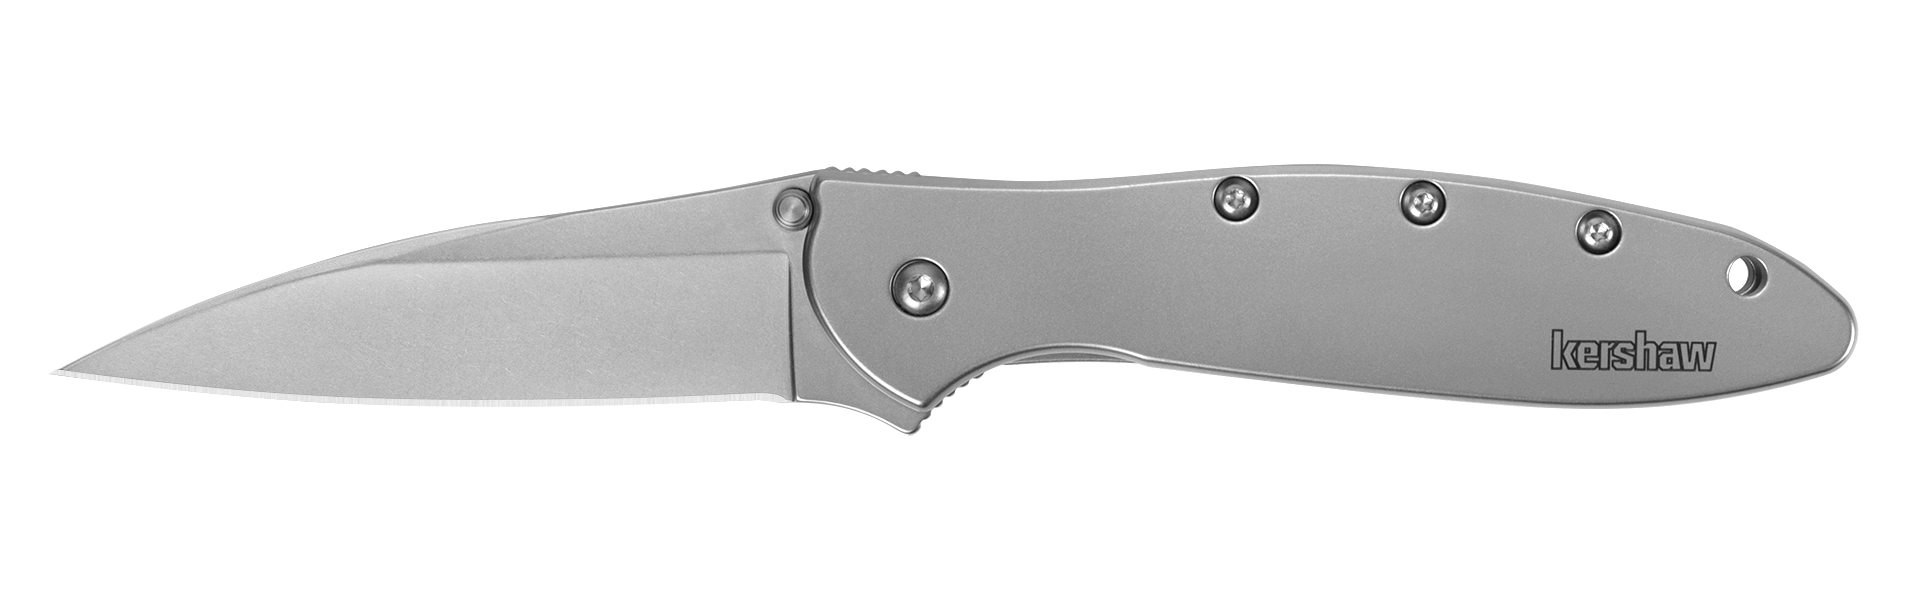 Kershaw Leek - Assisted Opening - Stainless Handle - Stainless Finish - 1660 - SNK/WTO - Home Office